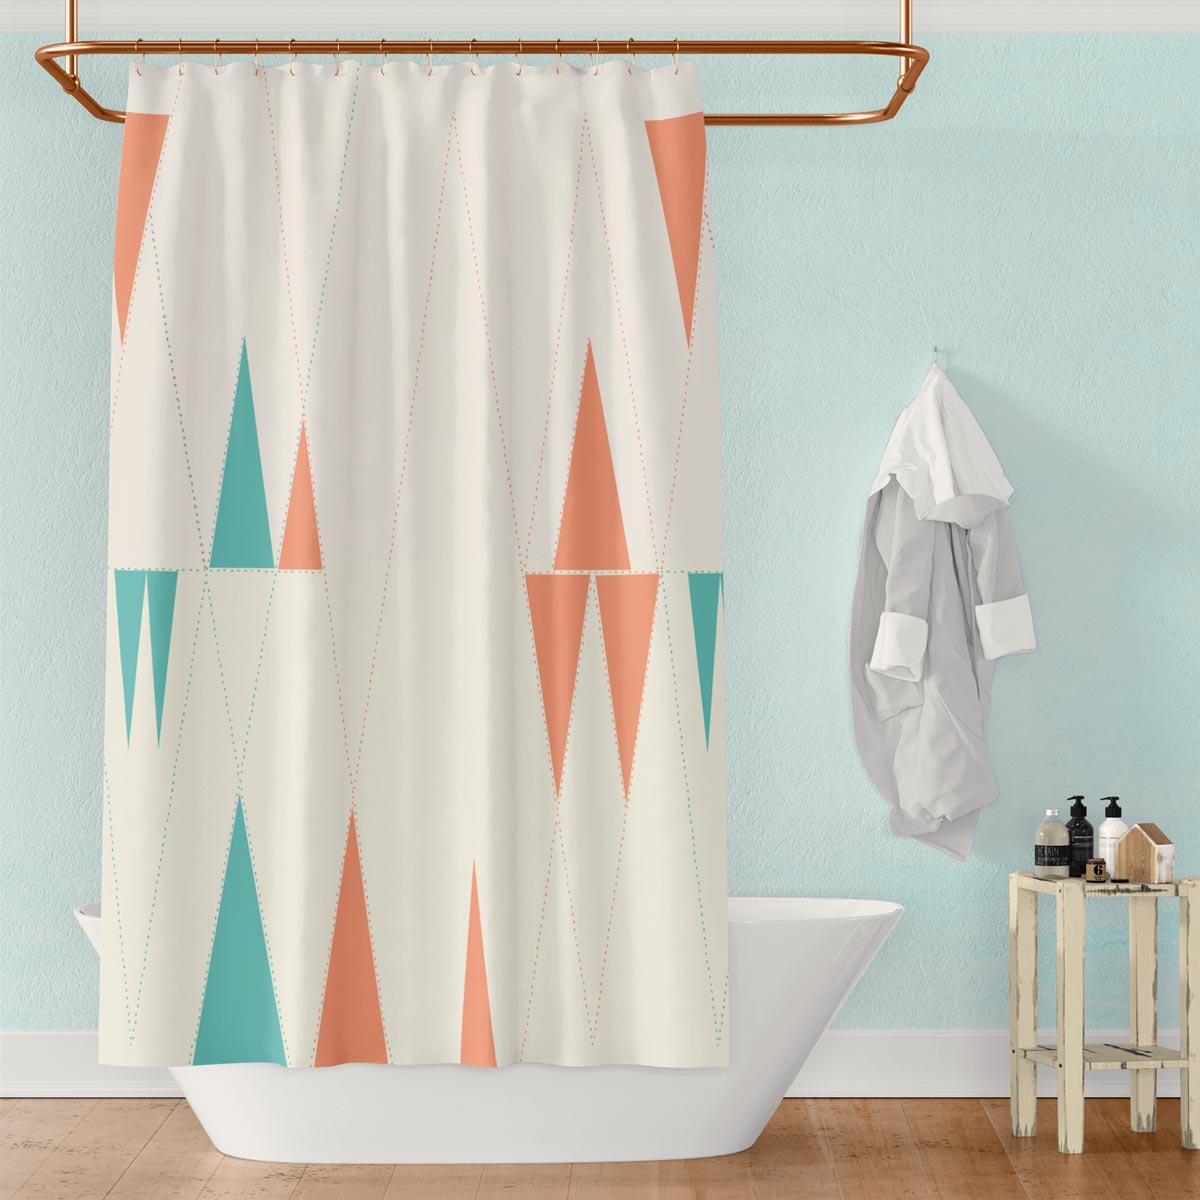 Funky Triangles – shower curtain with mid-century modern style